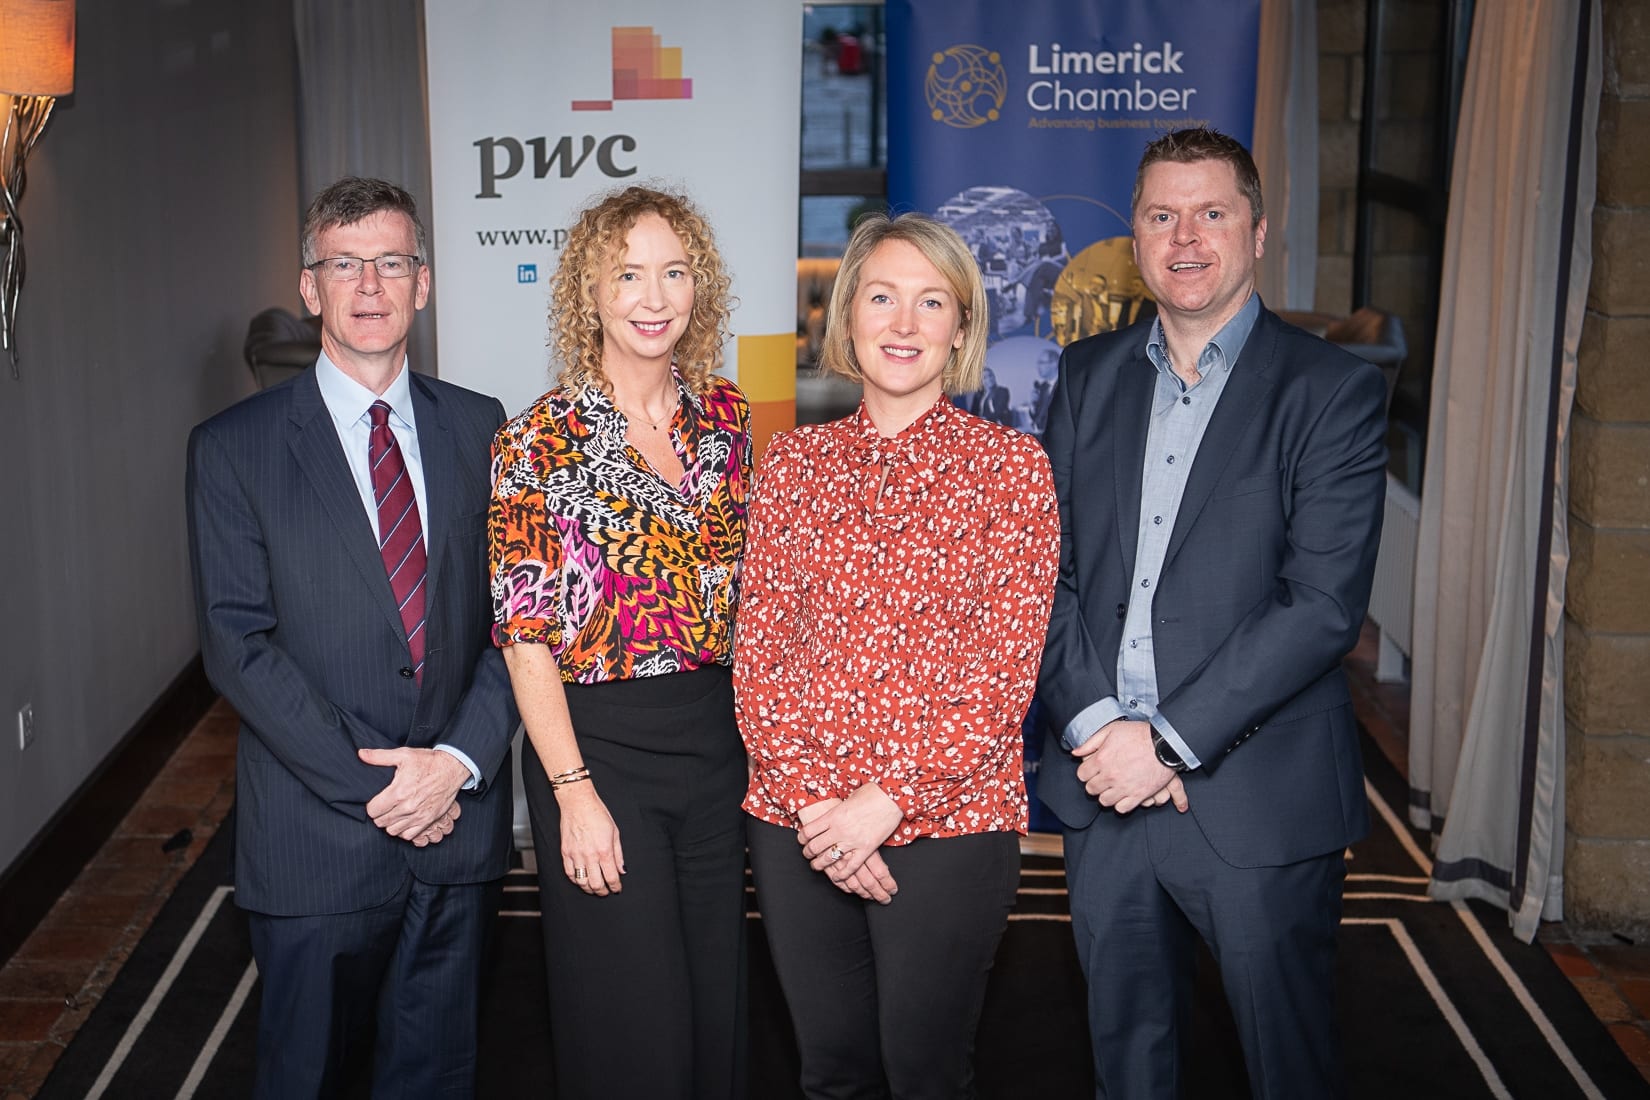 PWC Budget Breakfast in association with the Limerick Chamber which took place in the Castletroy Park Hotel on 9th October 2019, from left to right: Professor Alan Ahearne - Speaker, Mairead Connolly - PWC / Speaker, Emer Hodges - PWC / SPEAKER, Eoin Ryan - Limerick Chamber President. 
Photo by Morning Star Photography